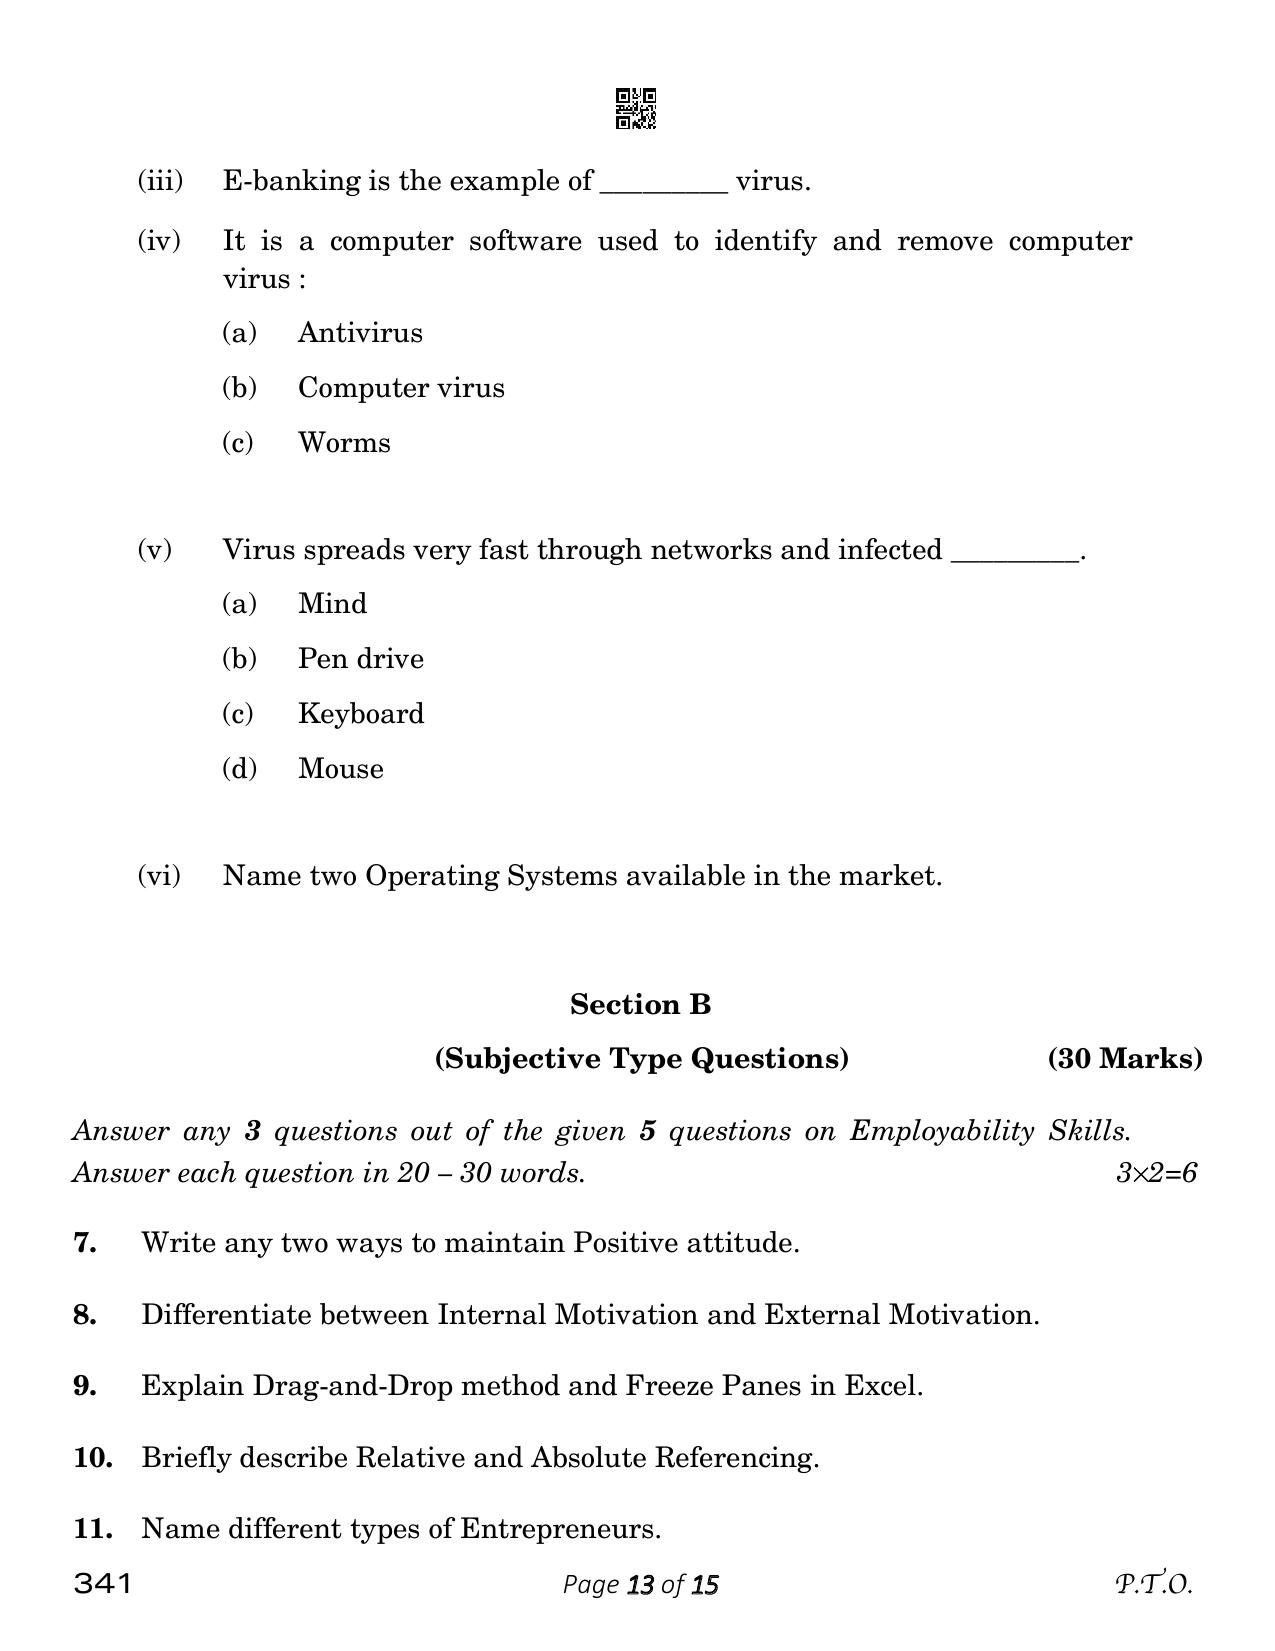 CBSE Class 12 Typography & Computer Applications (Compartment) 2023 Question Paper - Page 13